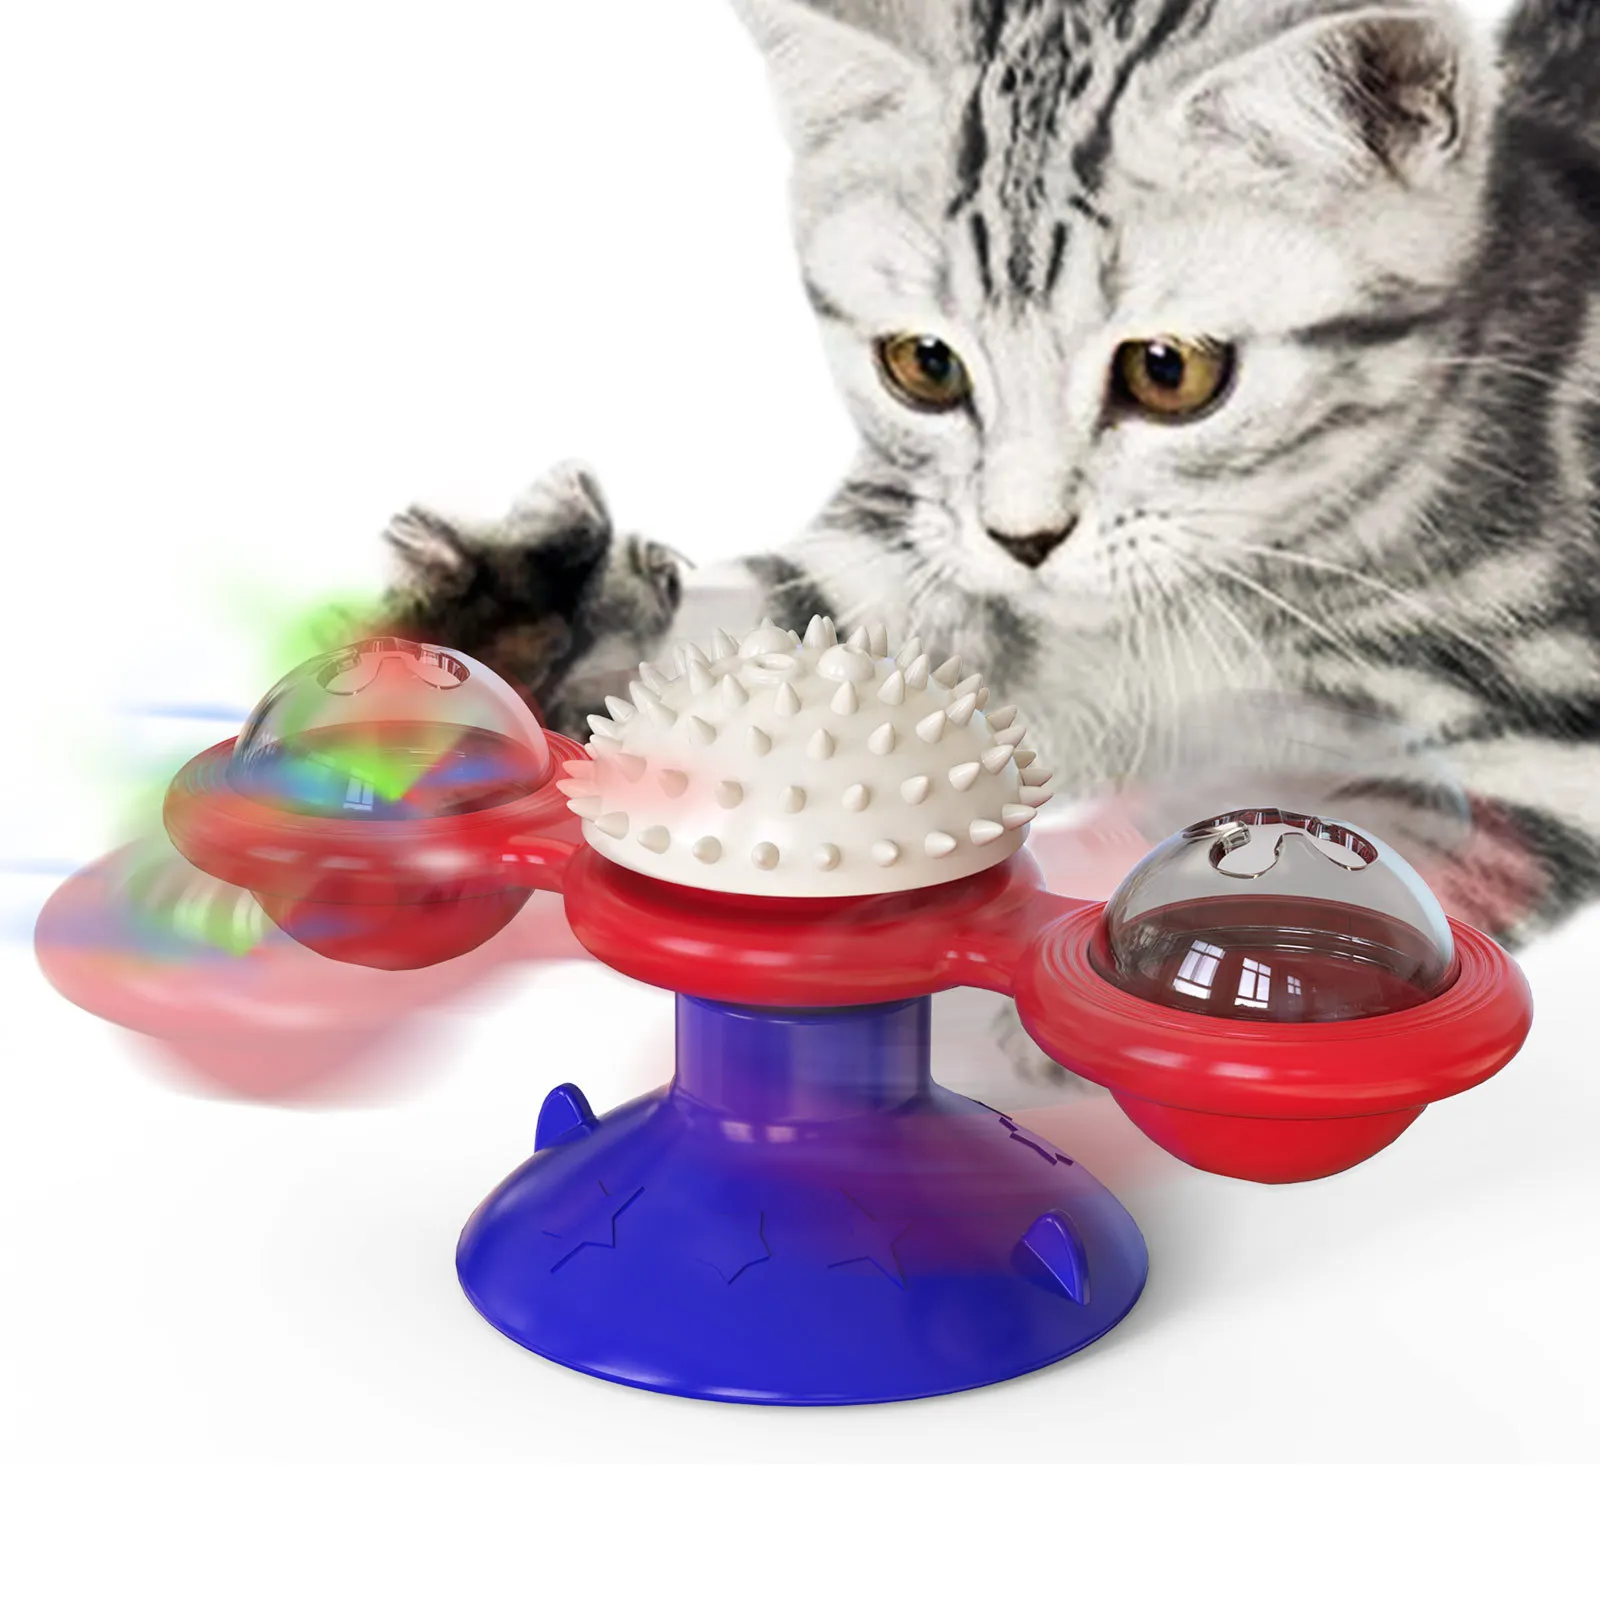 

Interactive Windmill Cat Toys With Catnip, Turntable Interactive Toys For Indoor Cats,Pet Training Educational Toys Eco Friendly, Blue,red blue,yellow,green